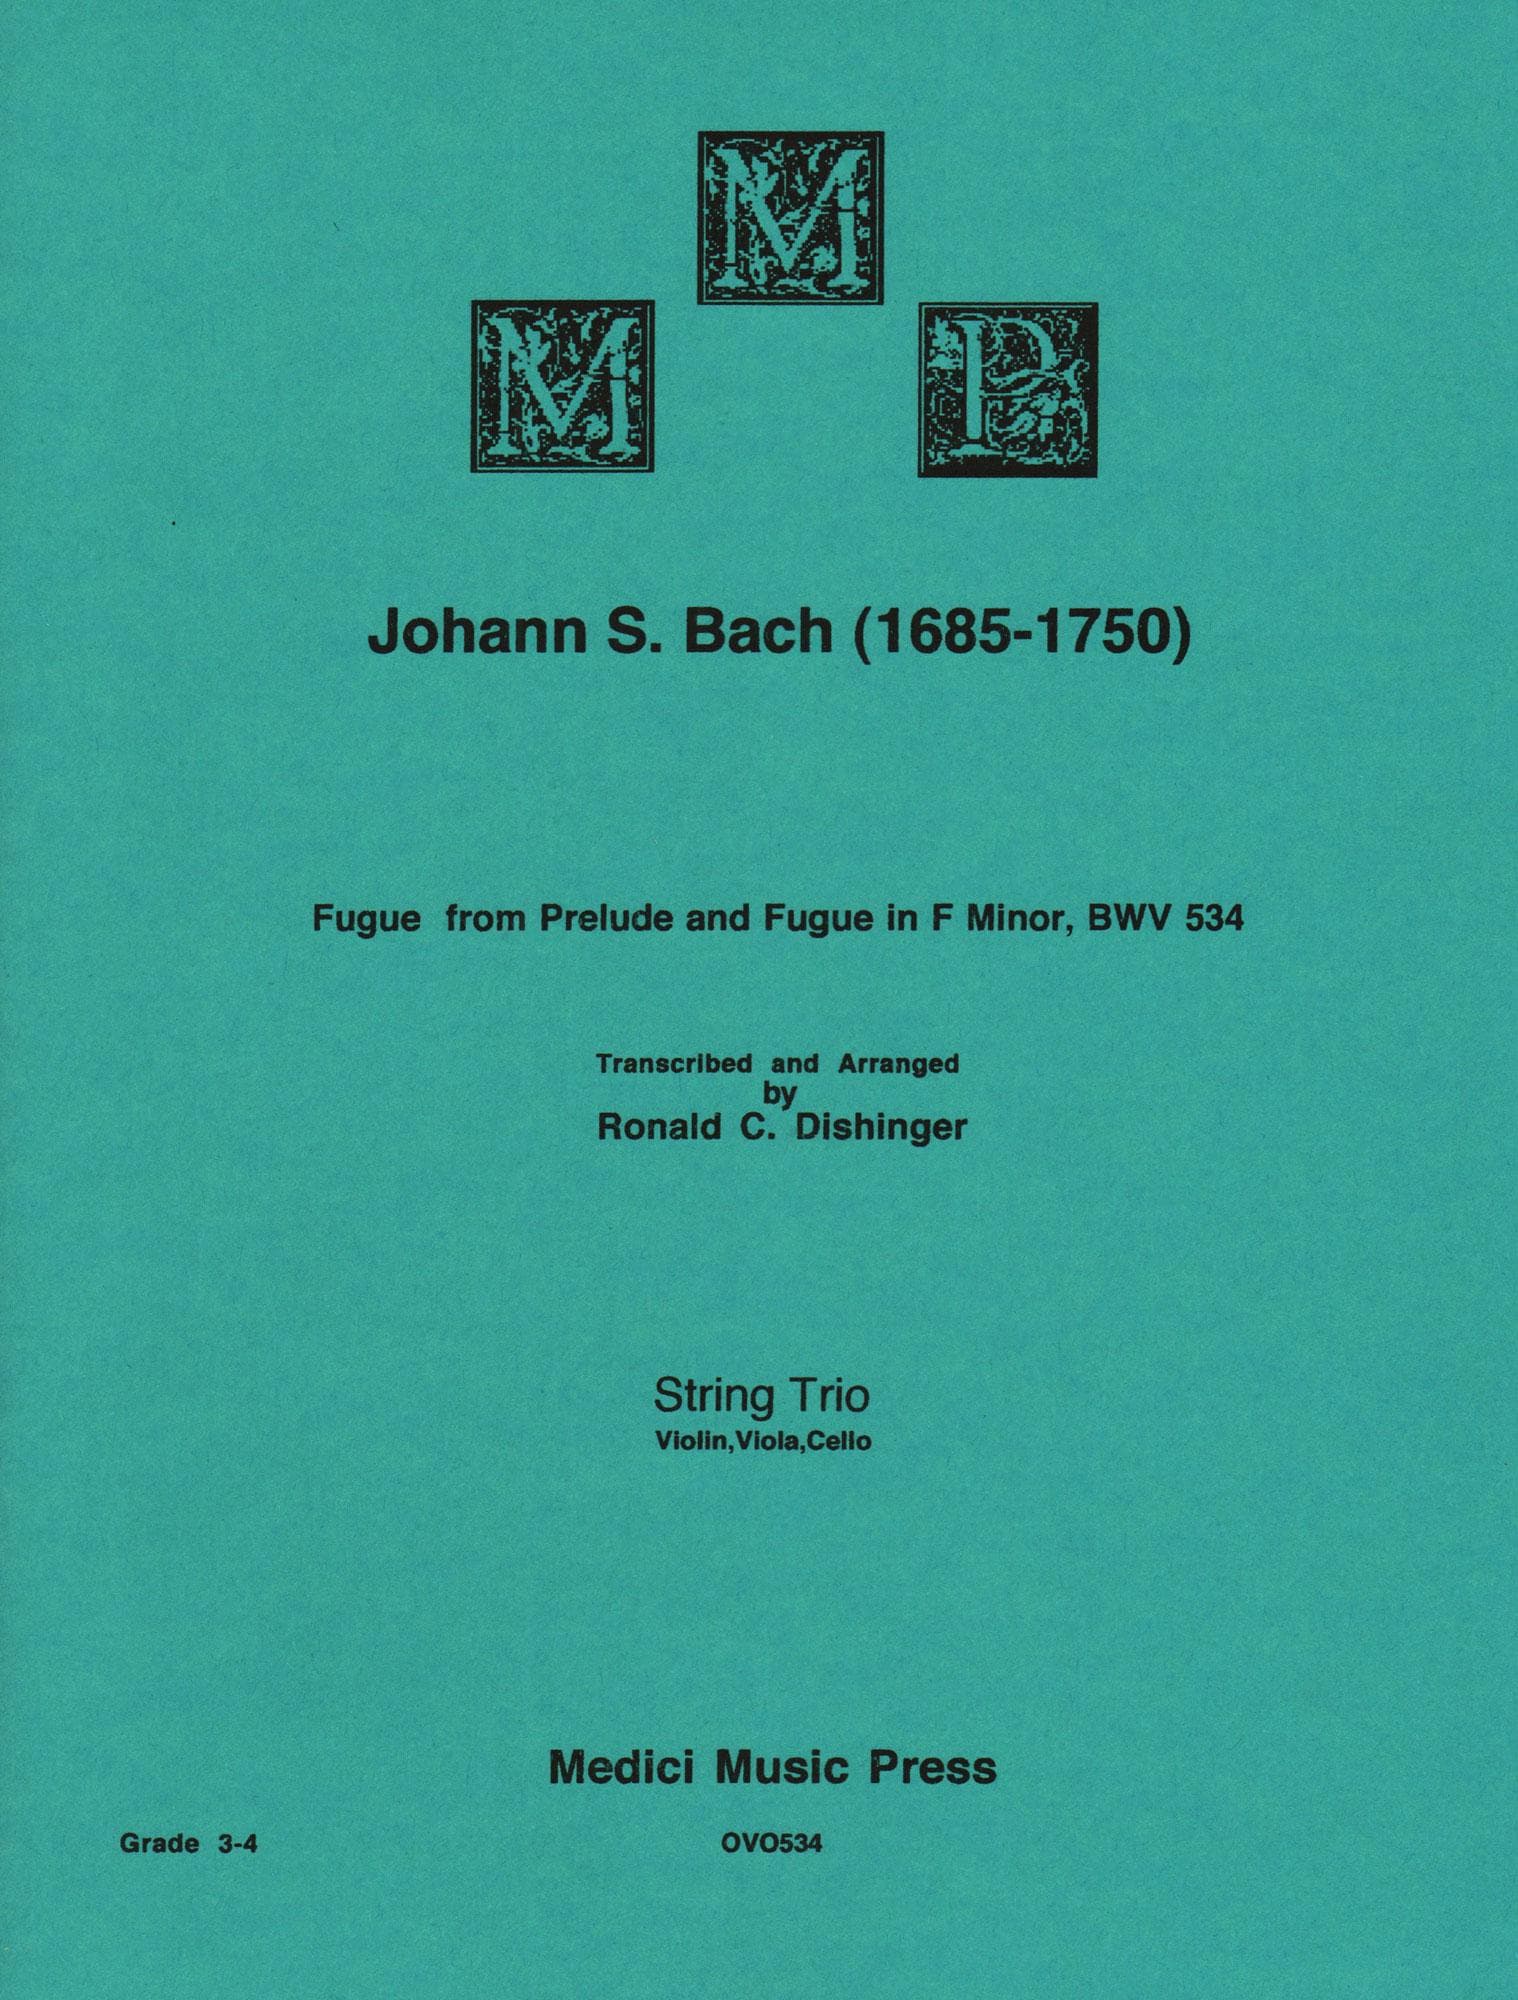 Bach, J.S. - Fugue from Prelude and Fugue (BWV 534) - for String Trio - arranged by Dishinger - Medici Music Press